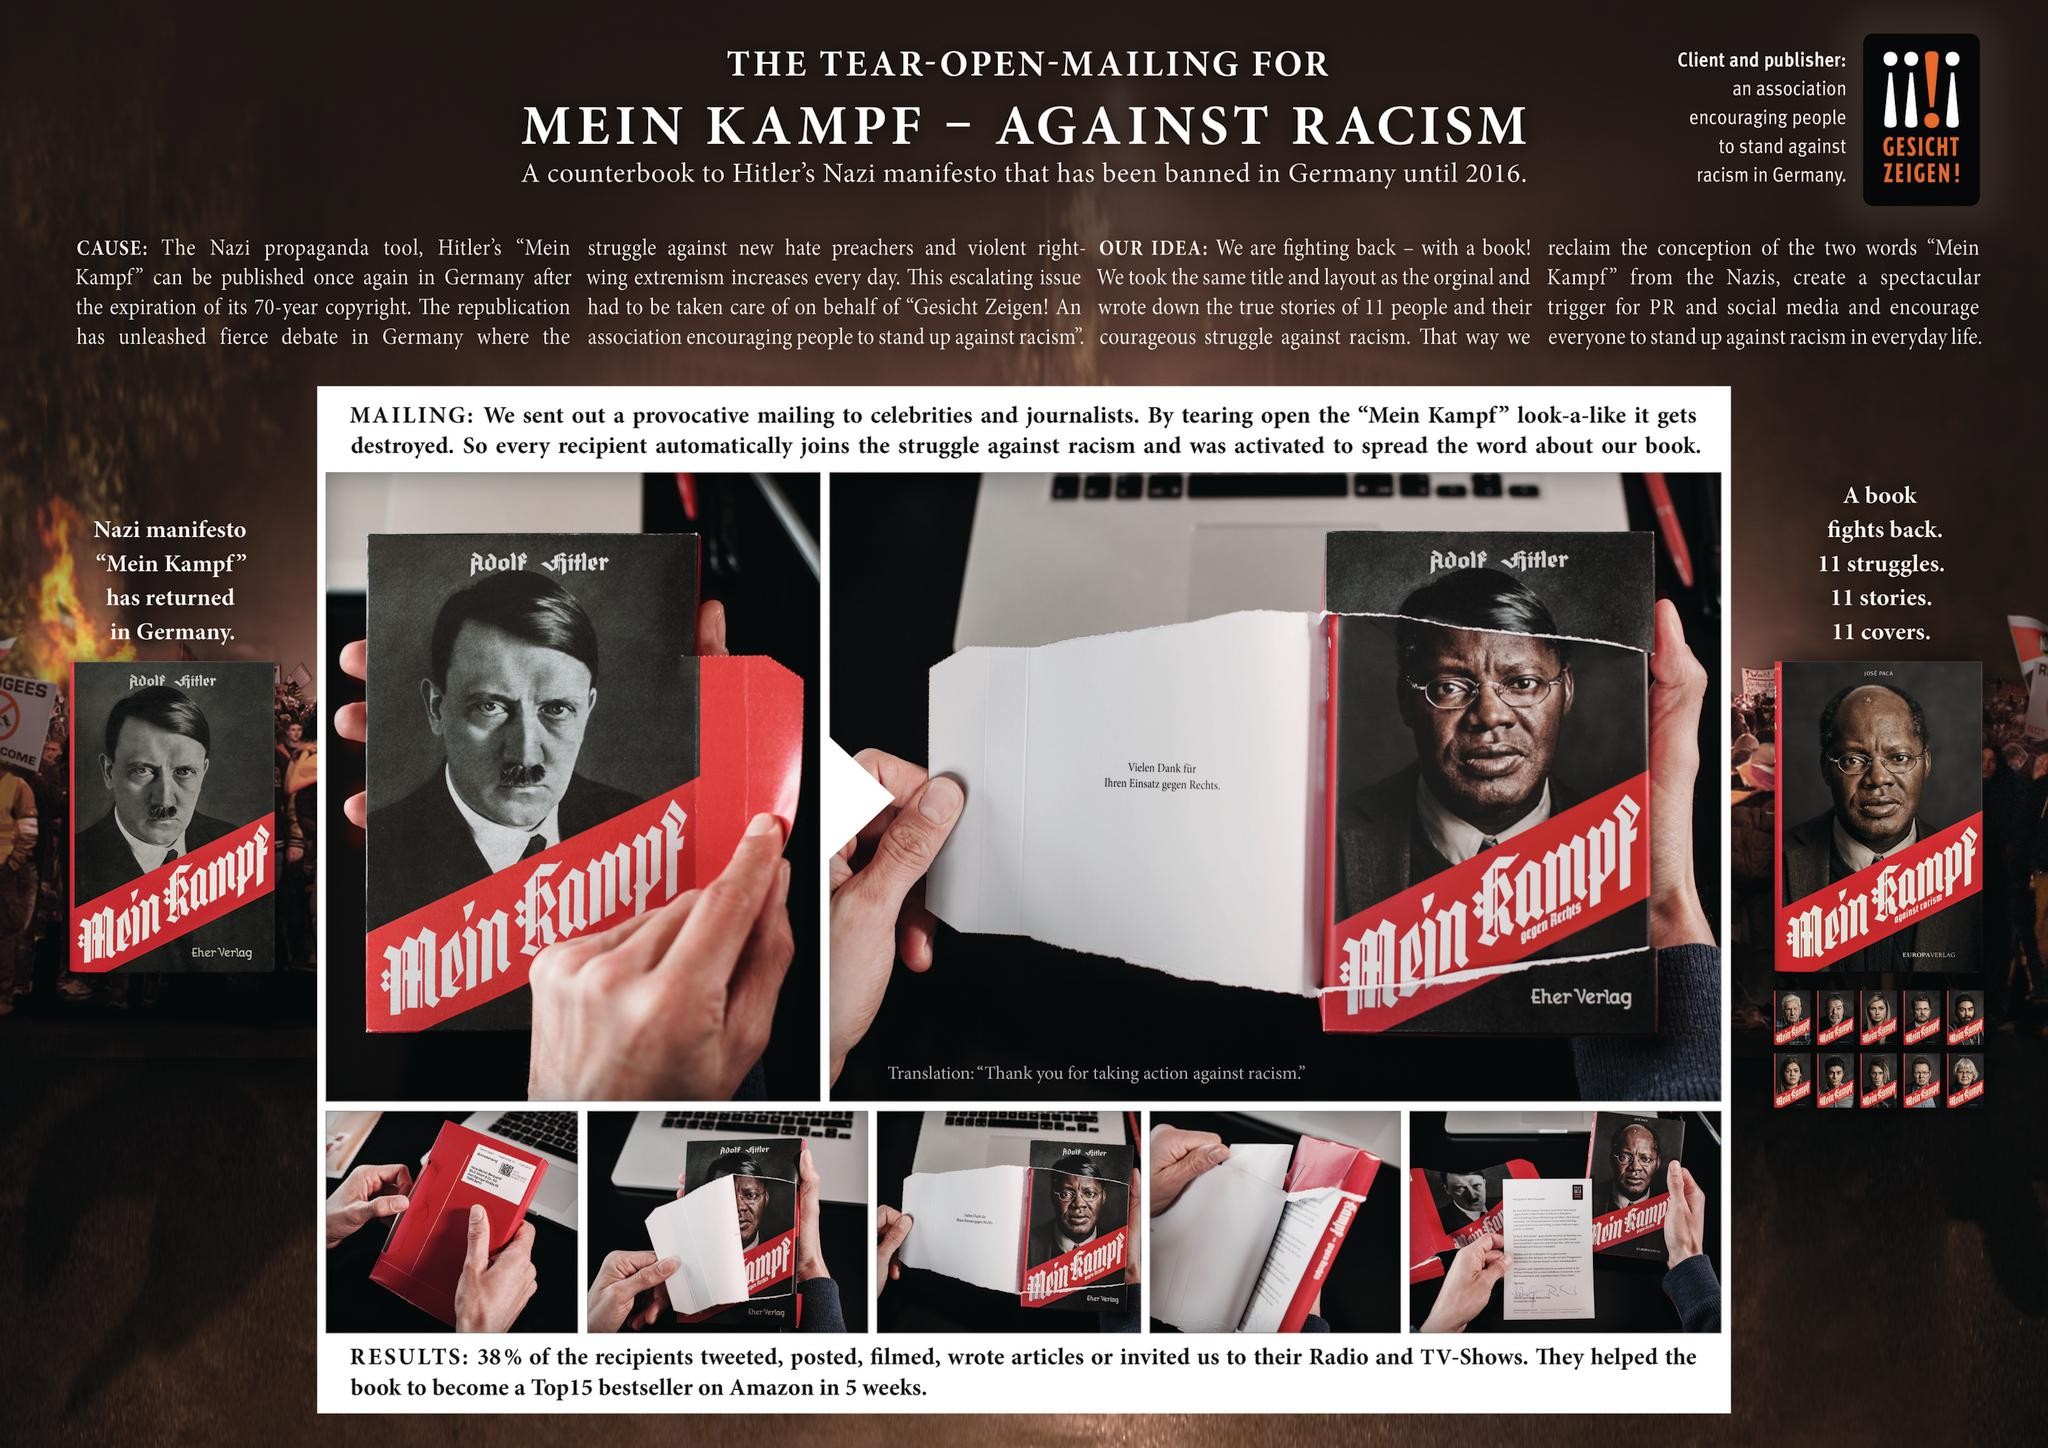 The Tear-Open-Mailing for "Mein Kampf – against racism"